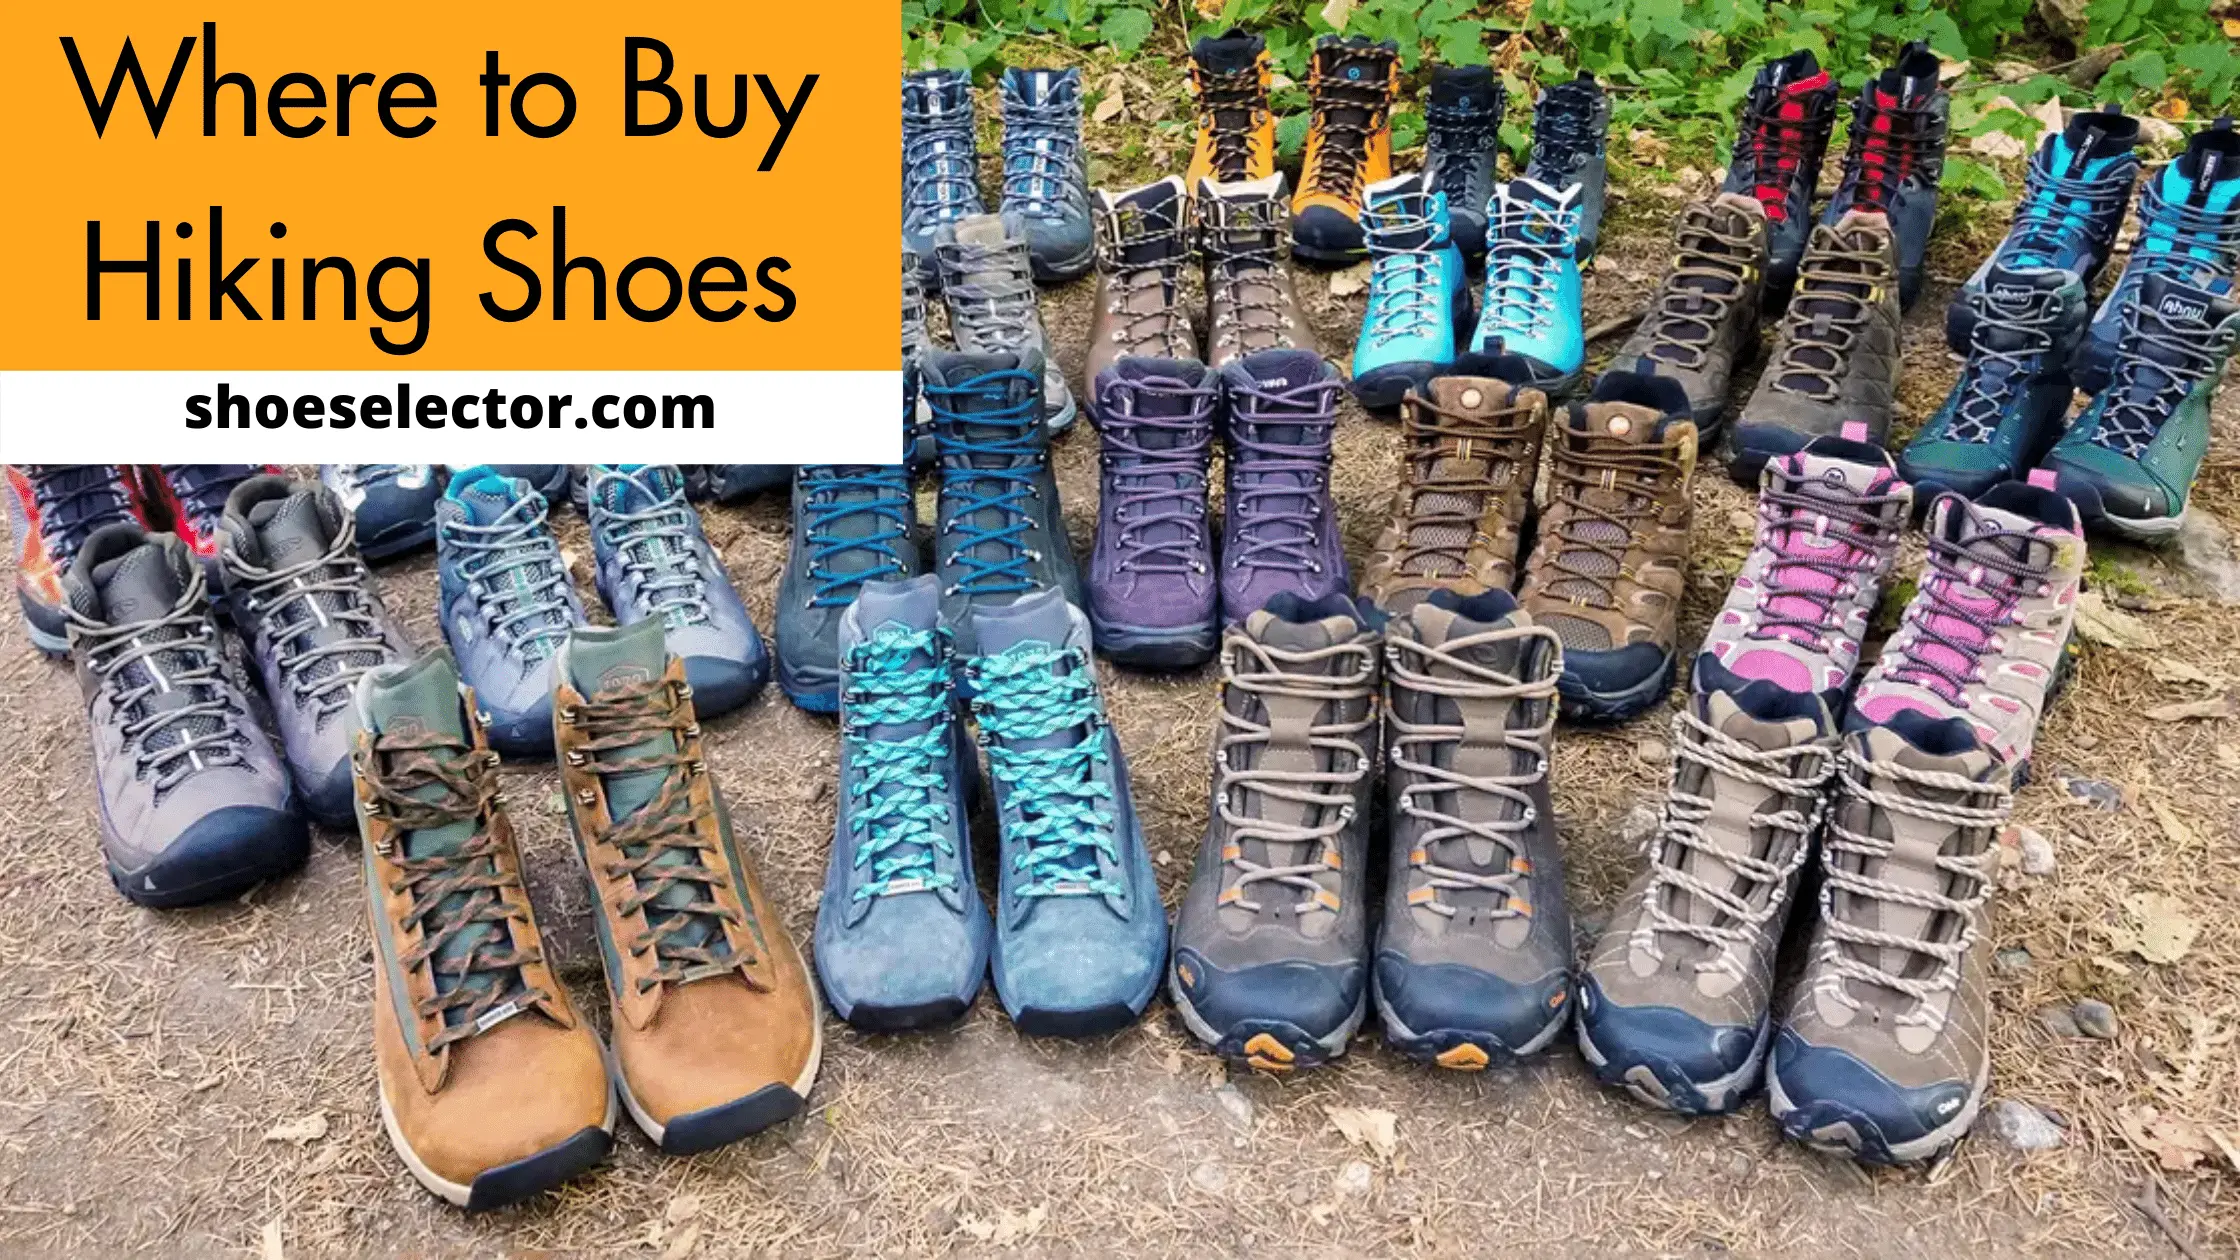 Where to Buy Hiking Shoes - Buyer's Guide